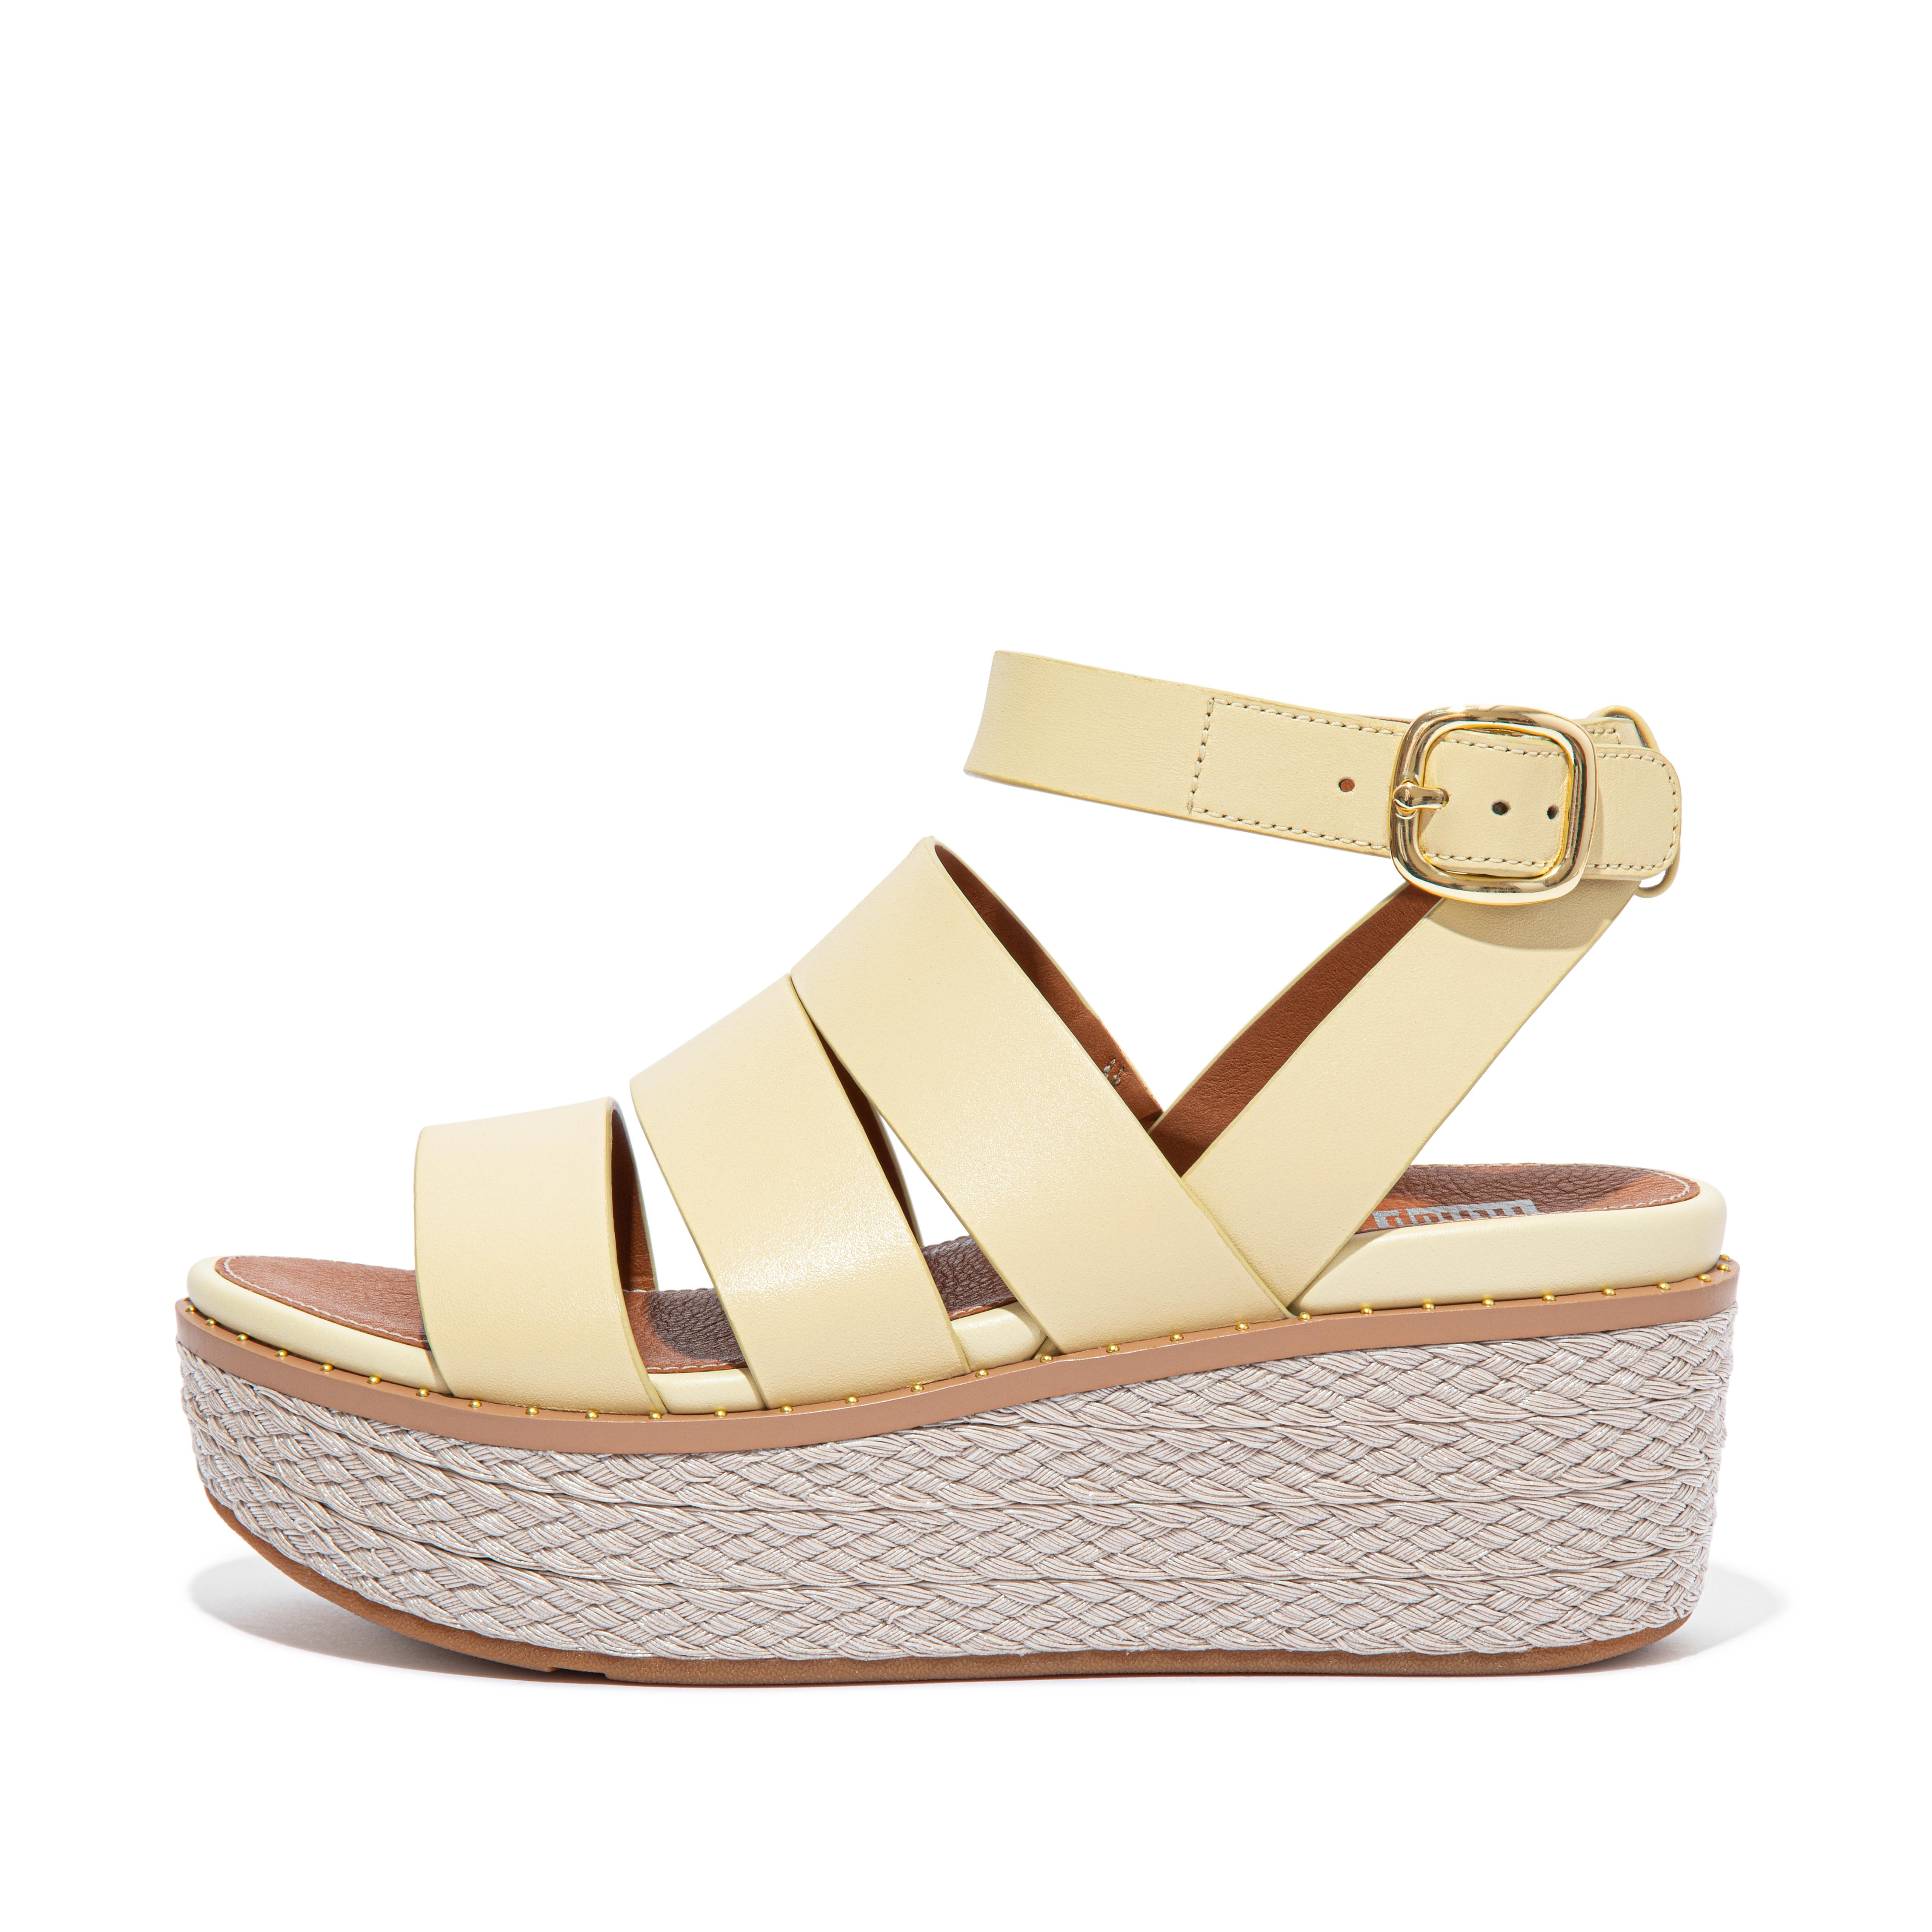 Fitflop Espadrille Leather Wedge Sandals